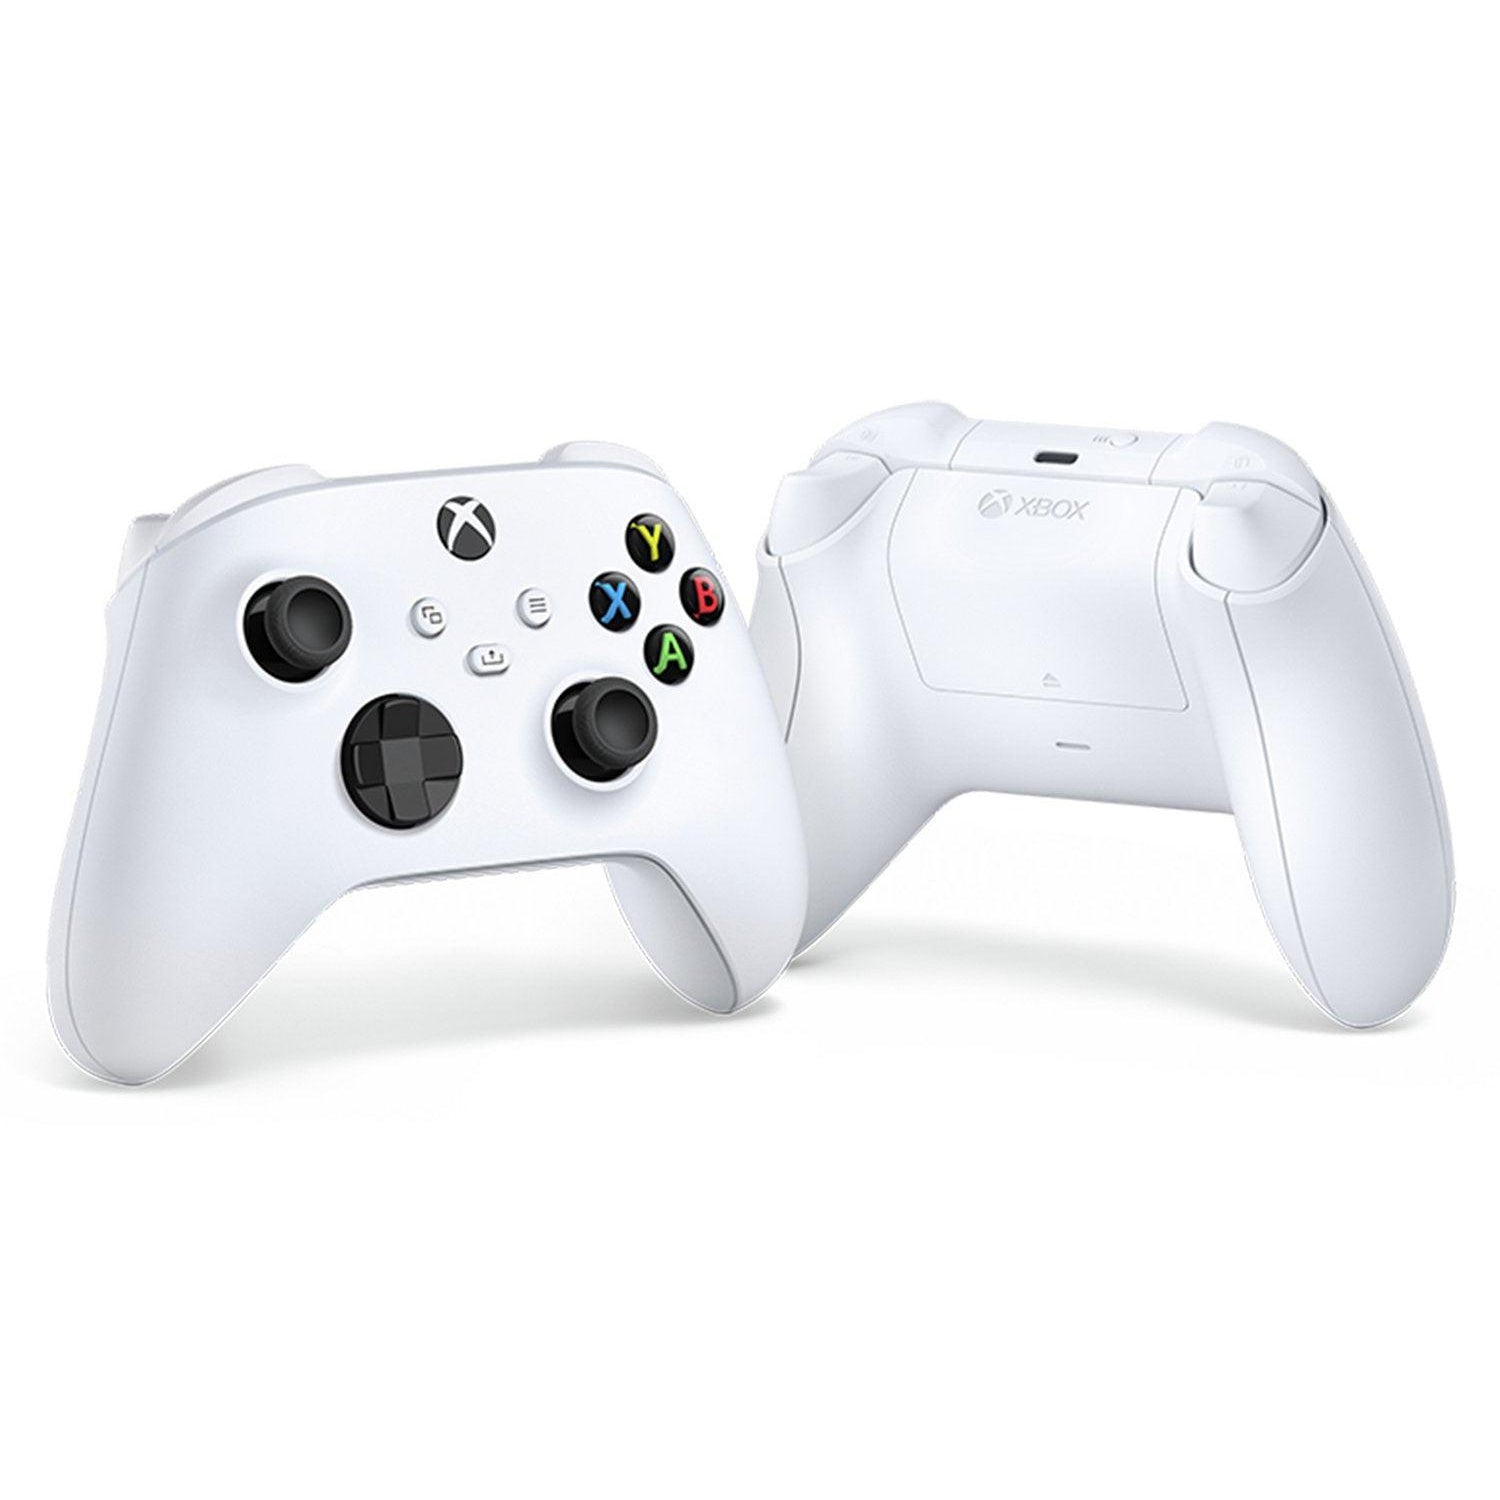 Microsoft Xbox Series X/S Wireless Controller - Robot White - Refurbished Excellent